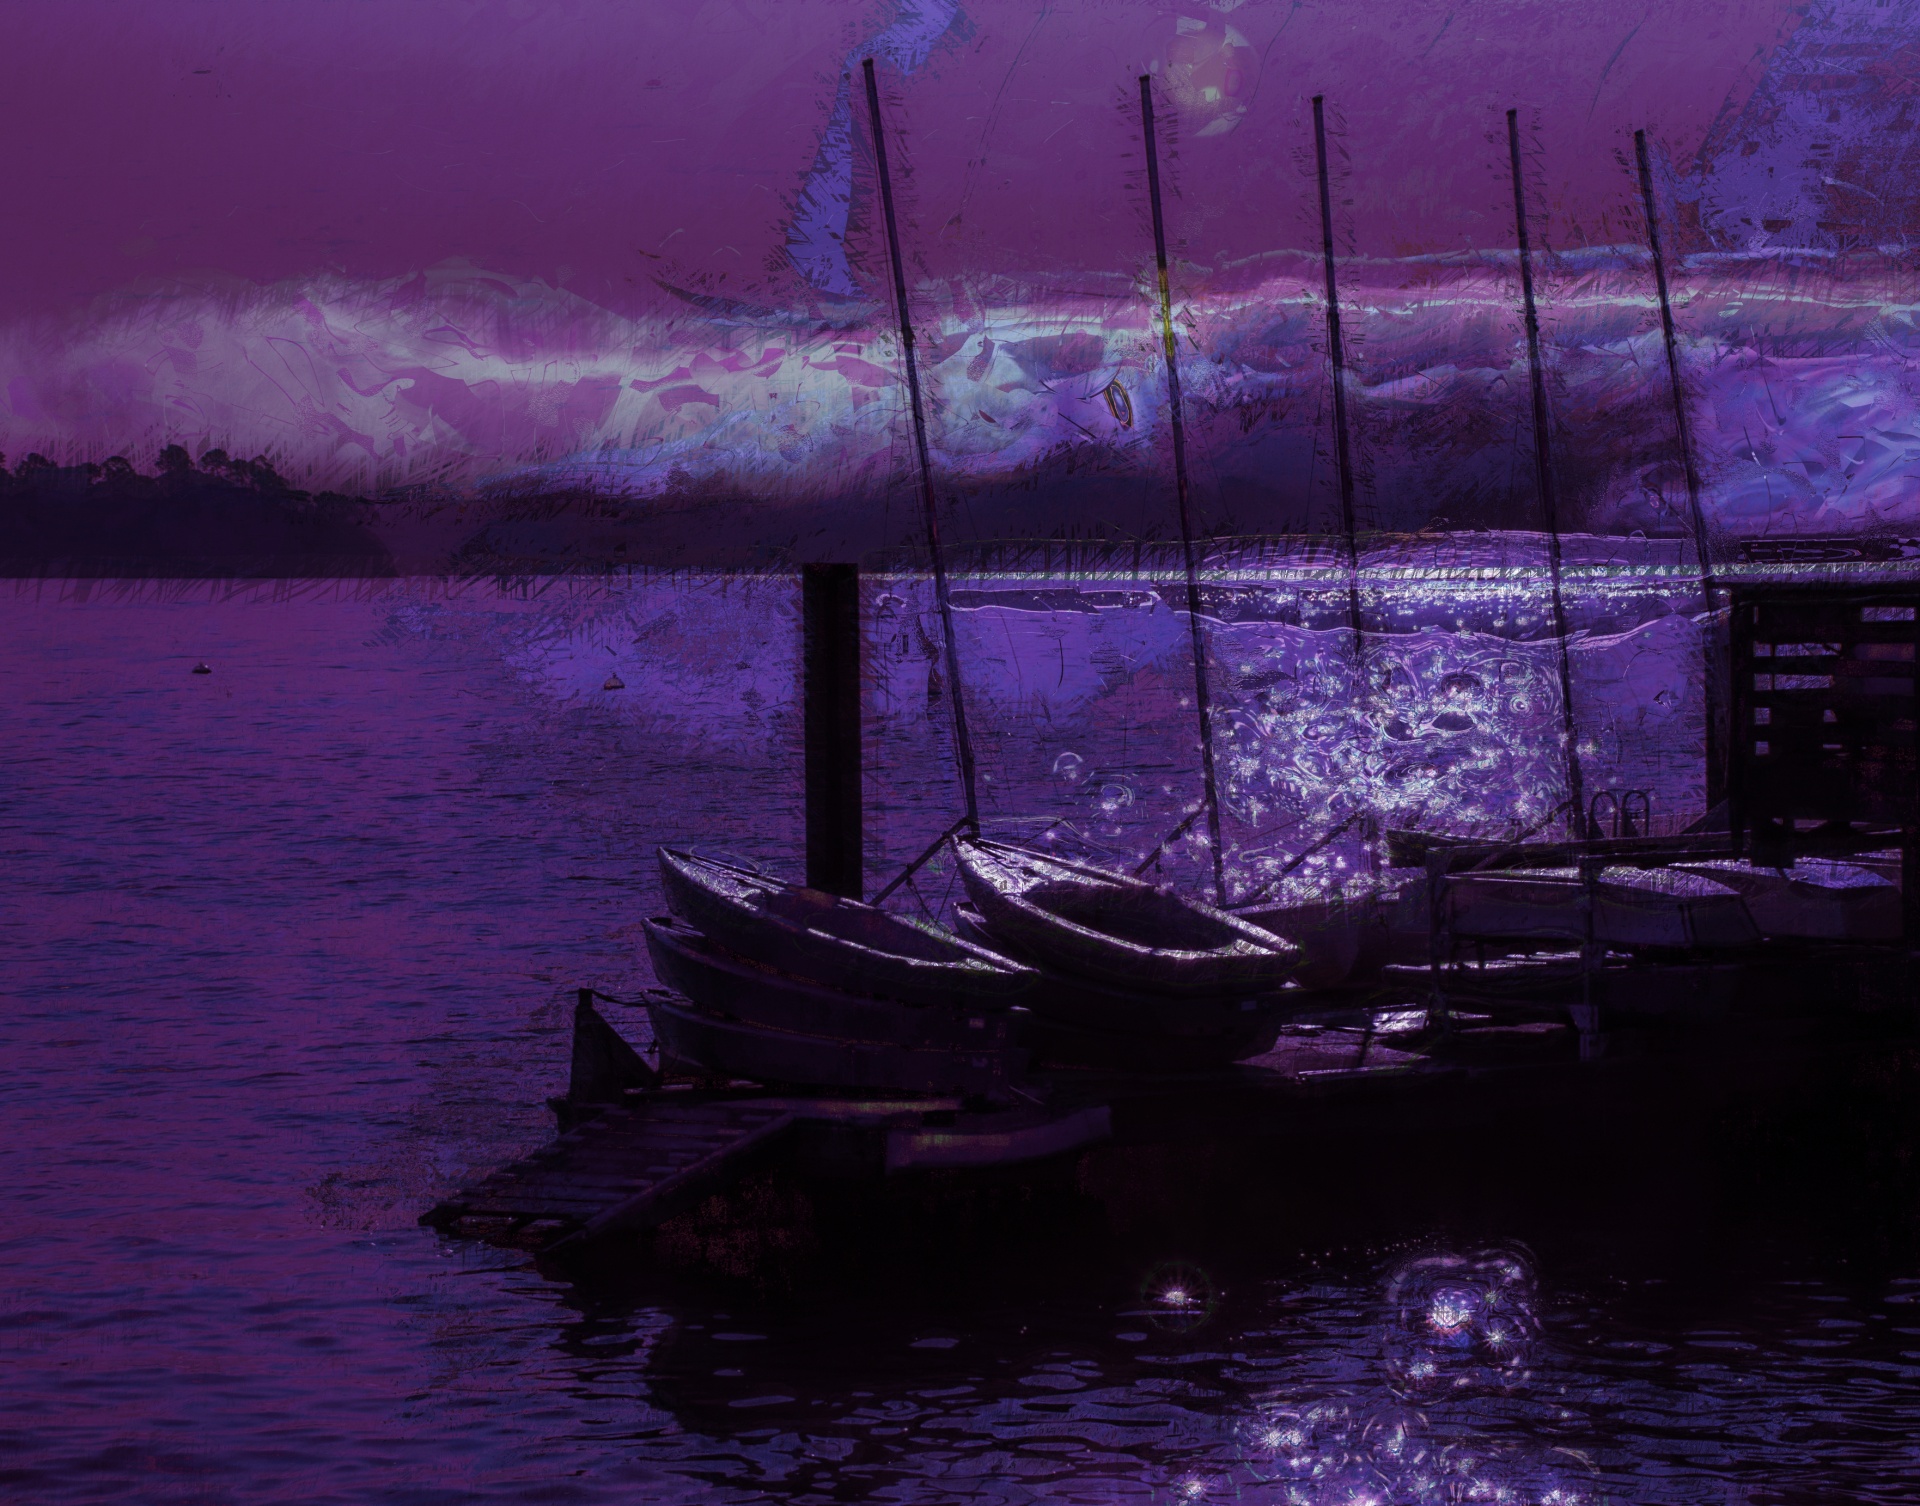 painting of two rowboats in purple hues